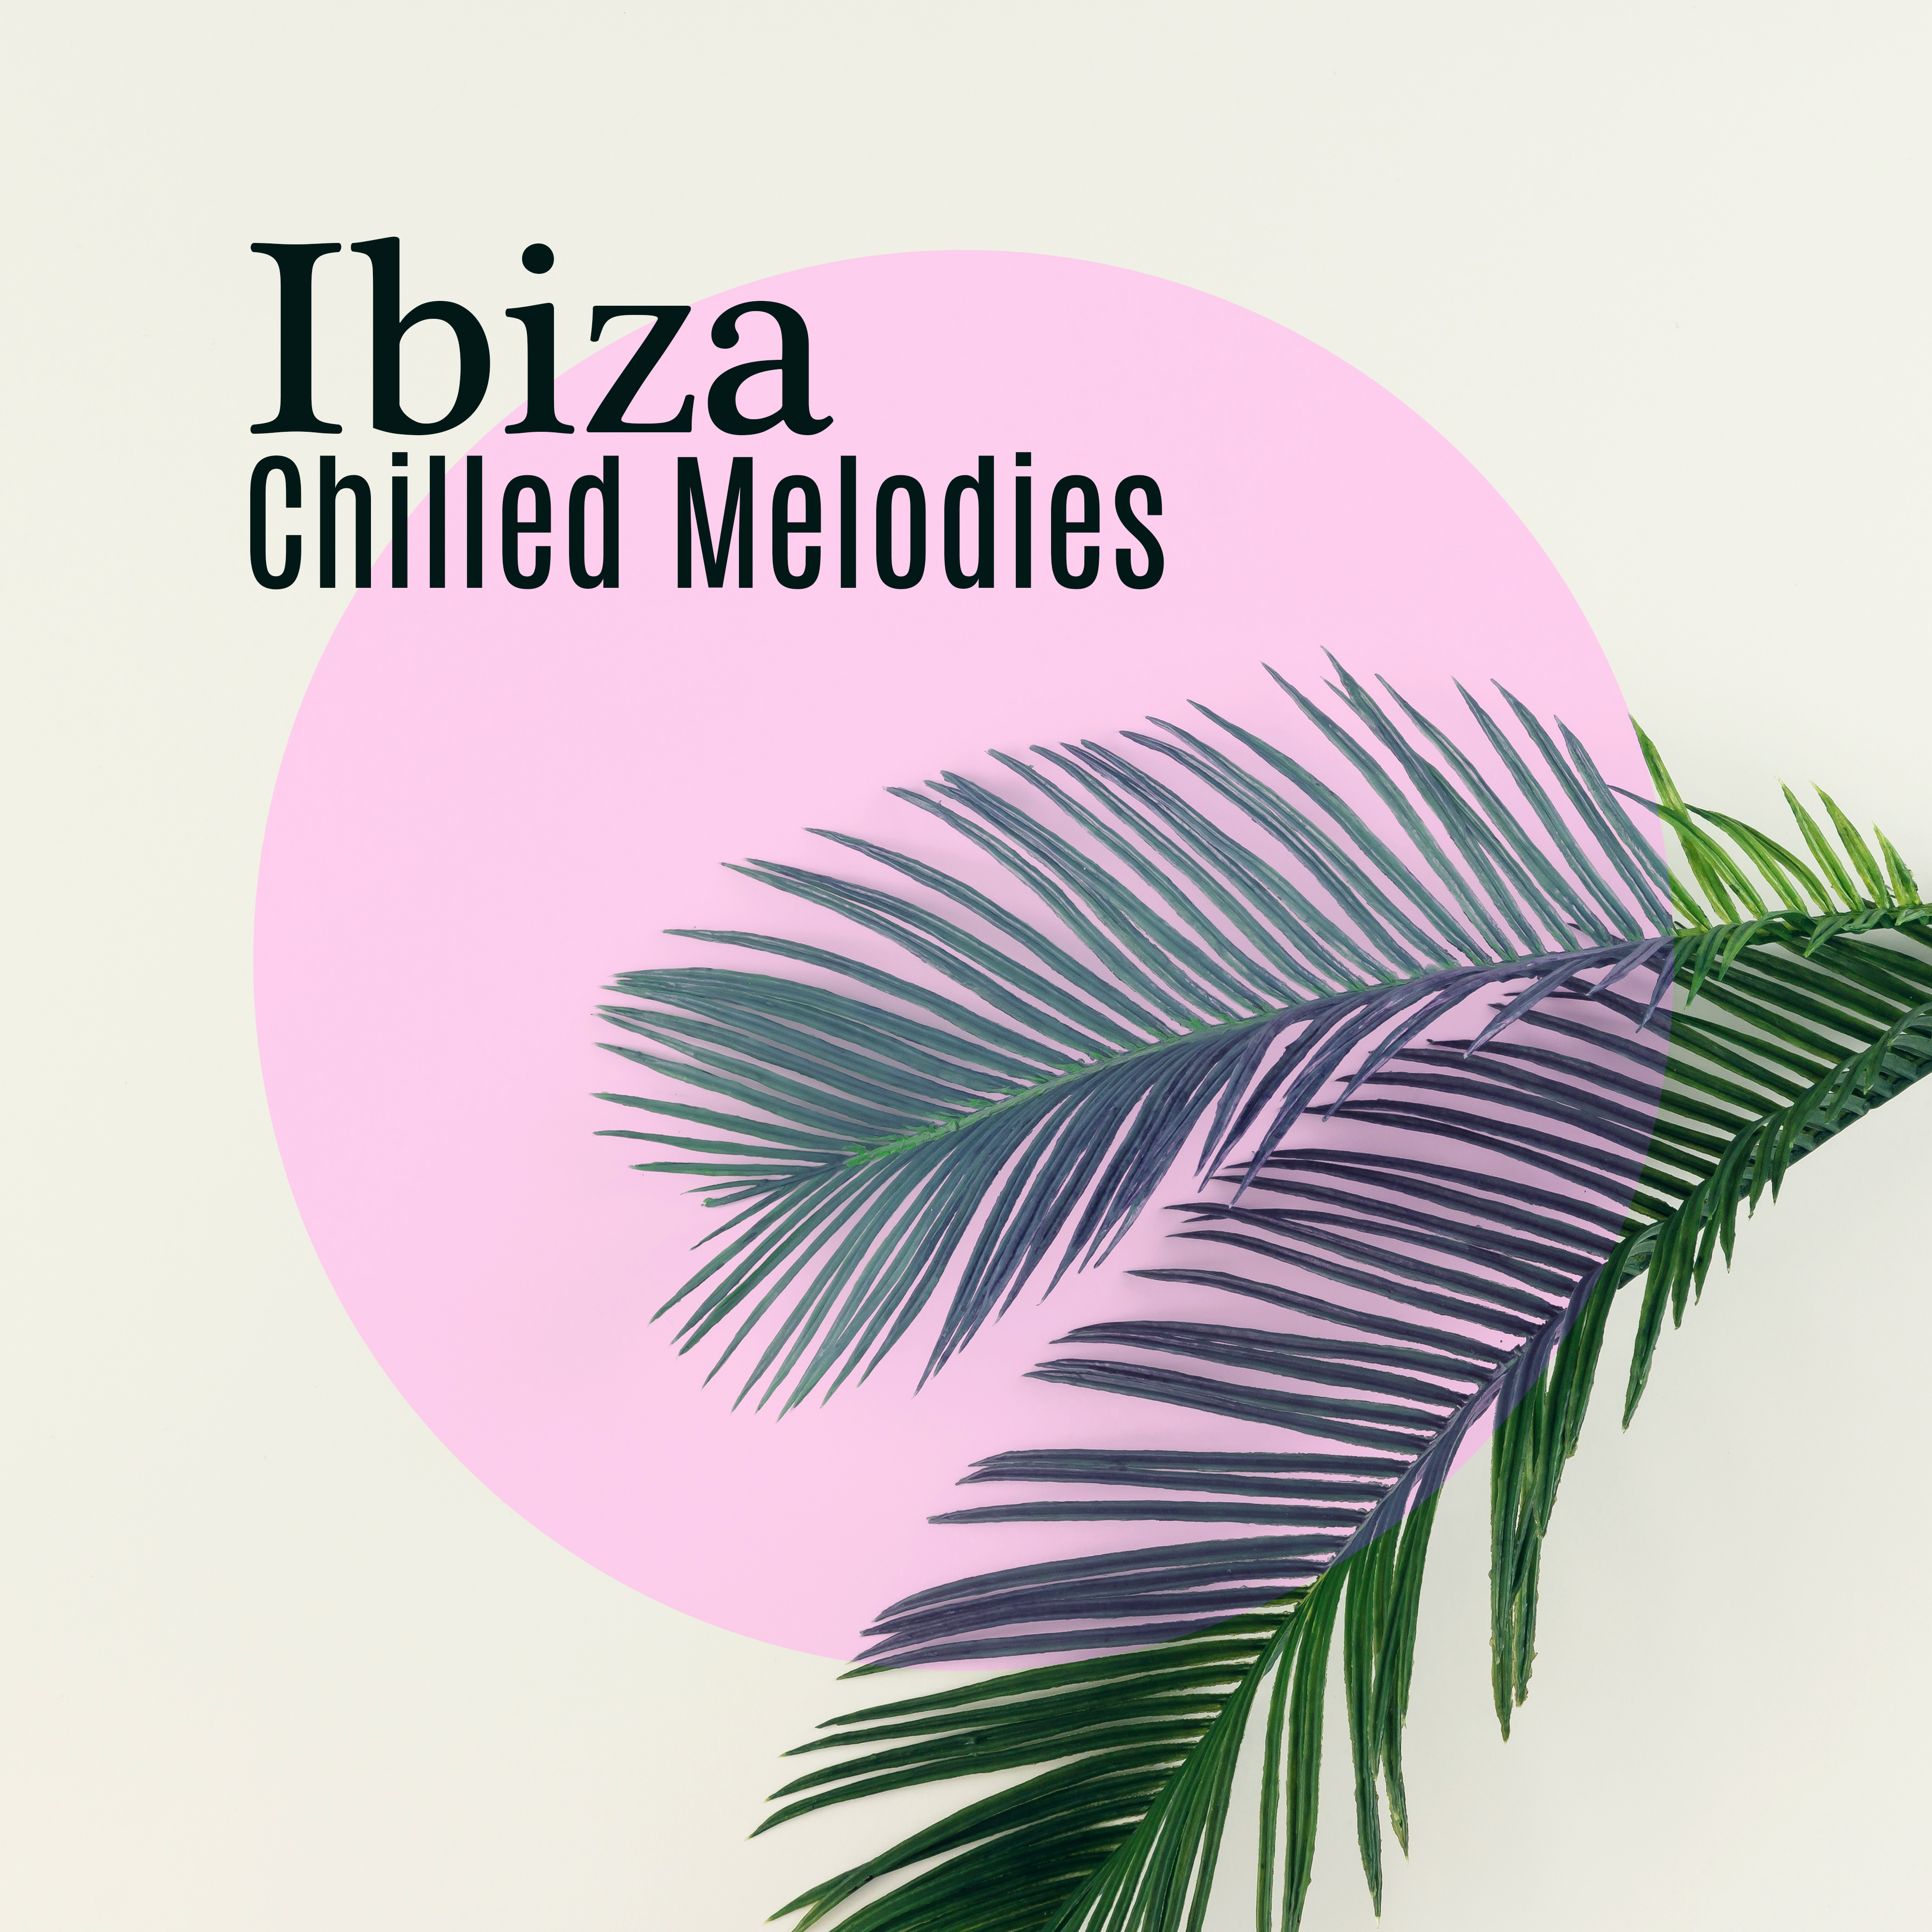 Ibiza Chilled Melodies